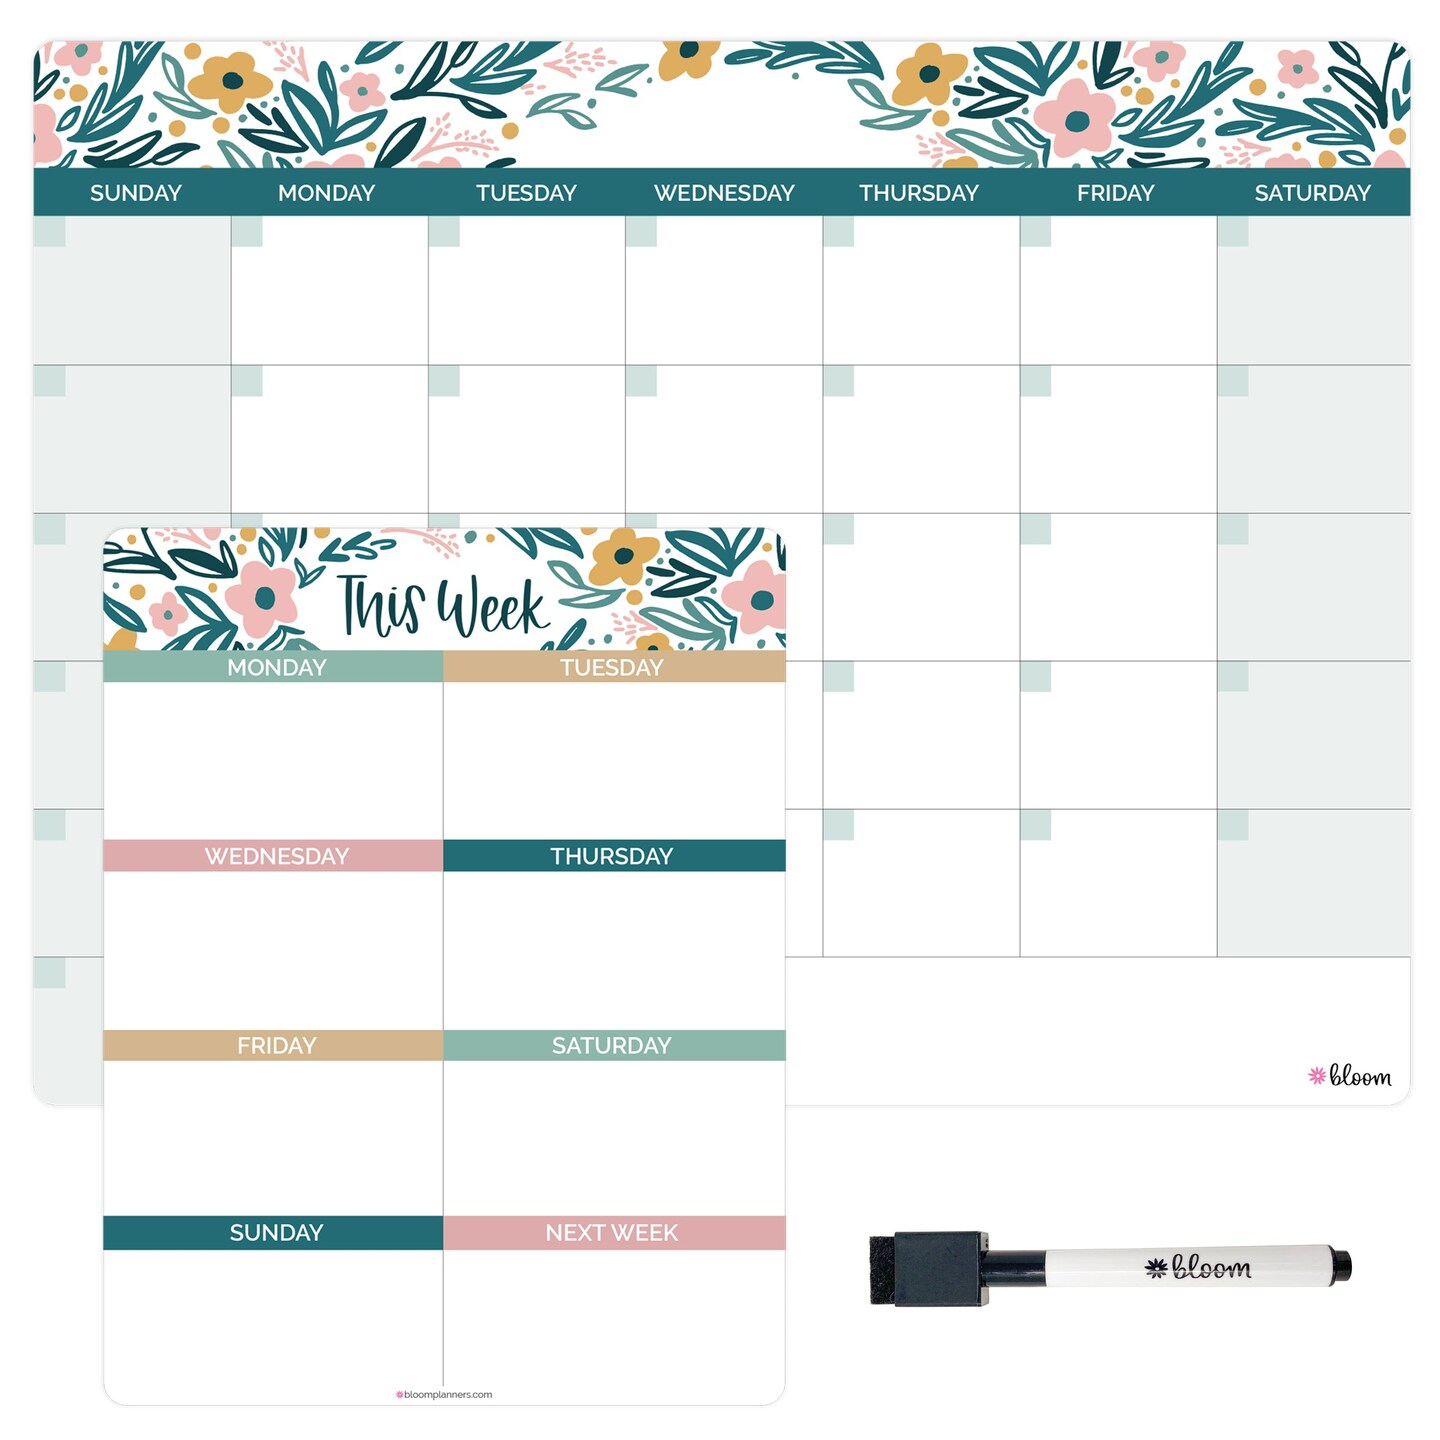 bloom daily planners 3 Piece Magnetic Dry Erase Planner Set, Garden Blooms